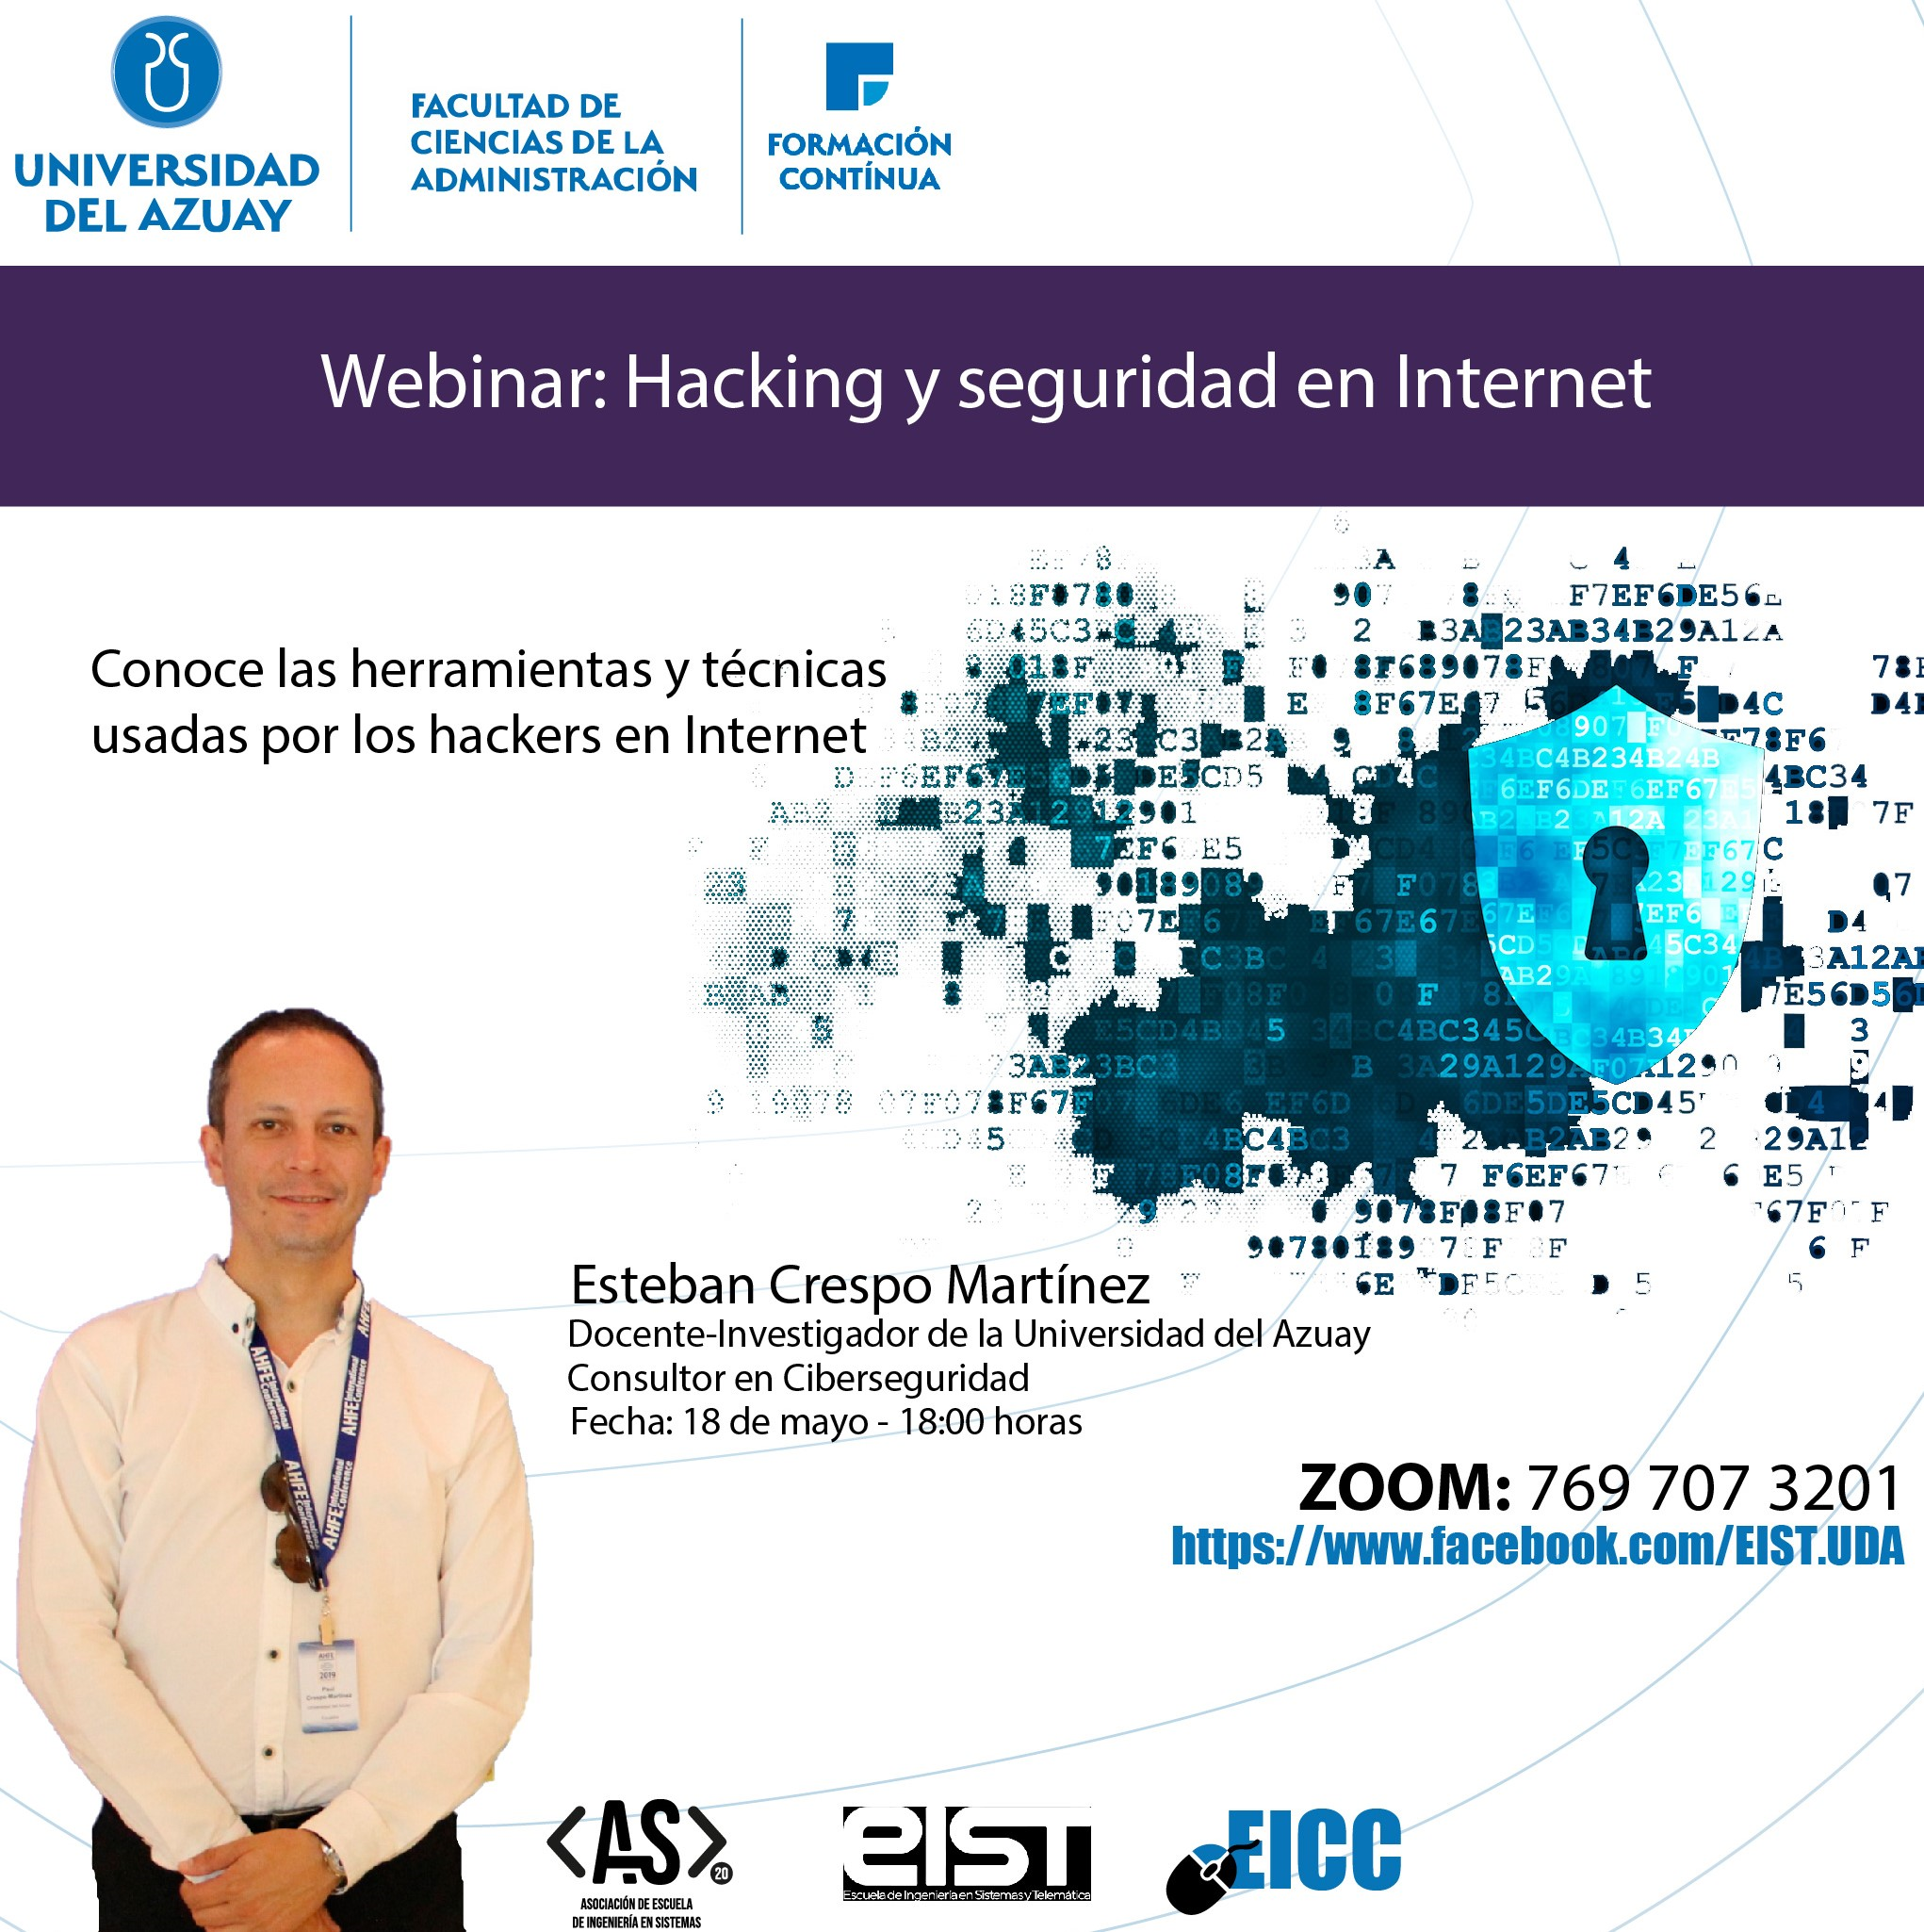 Event on hacking and internet security